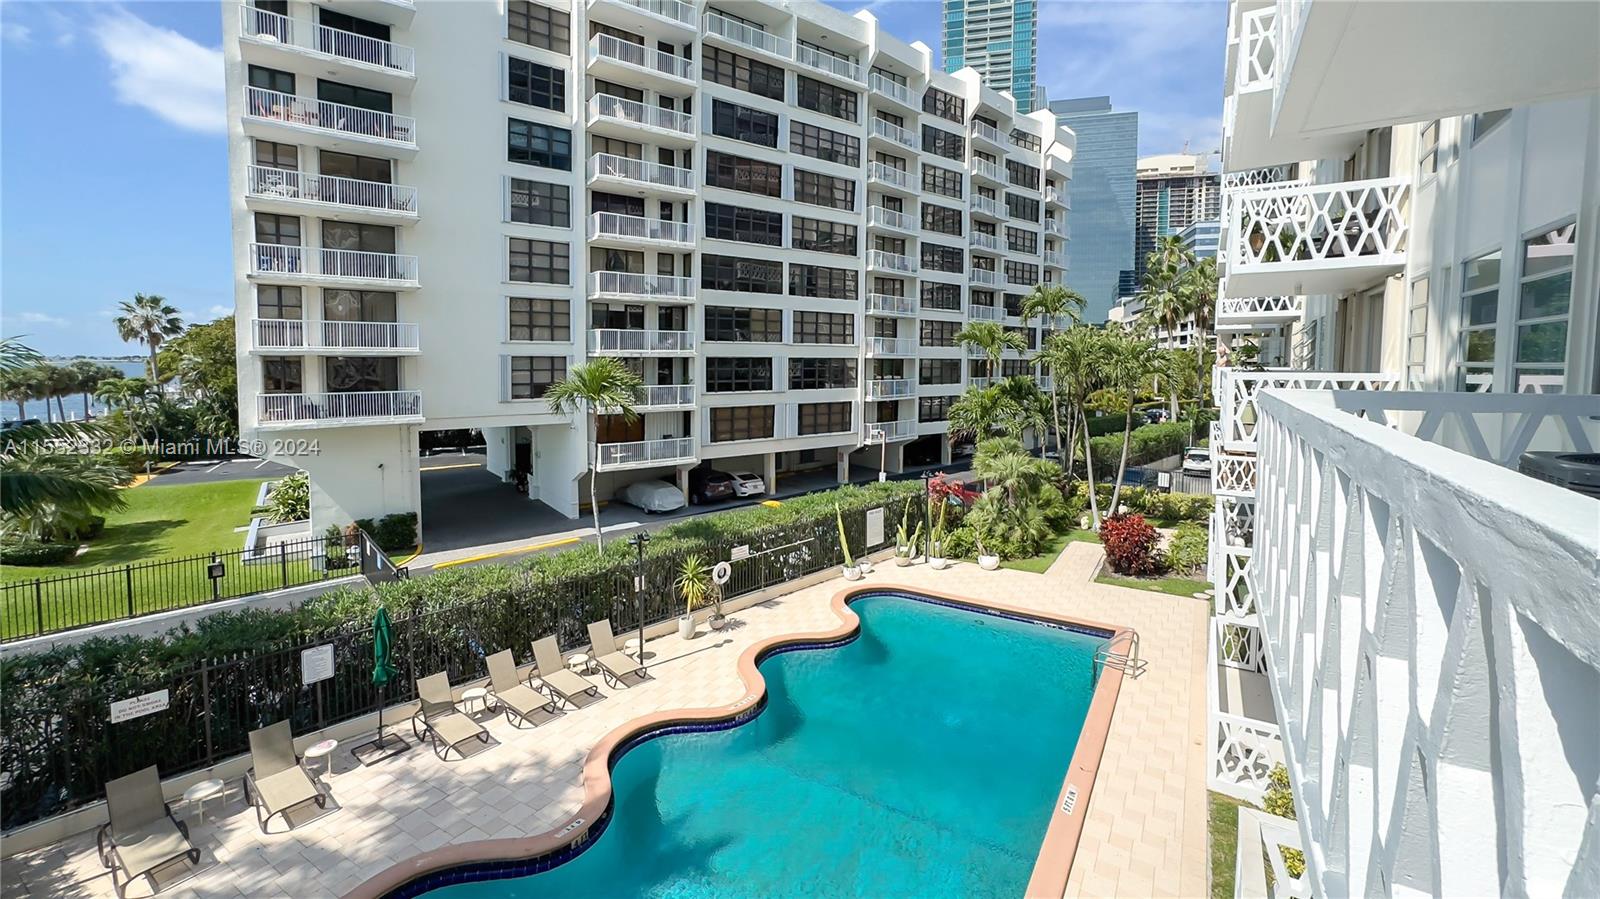 1430  Brickell Bay Dr #305 For Sale A11552332, FL